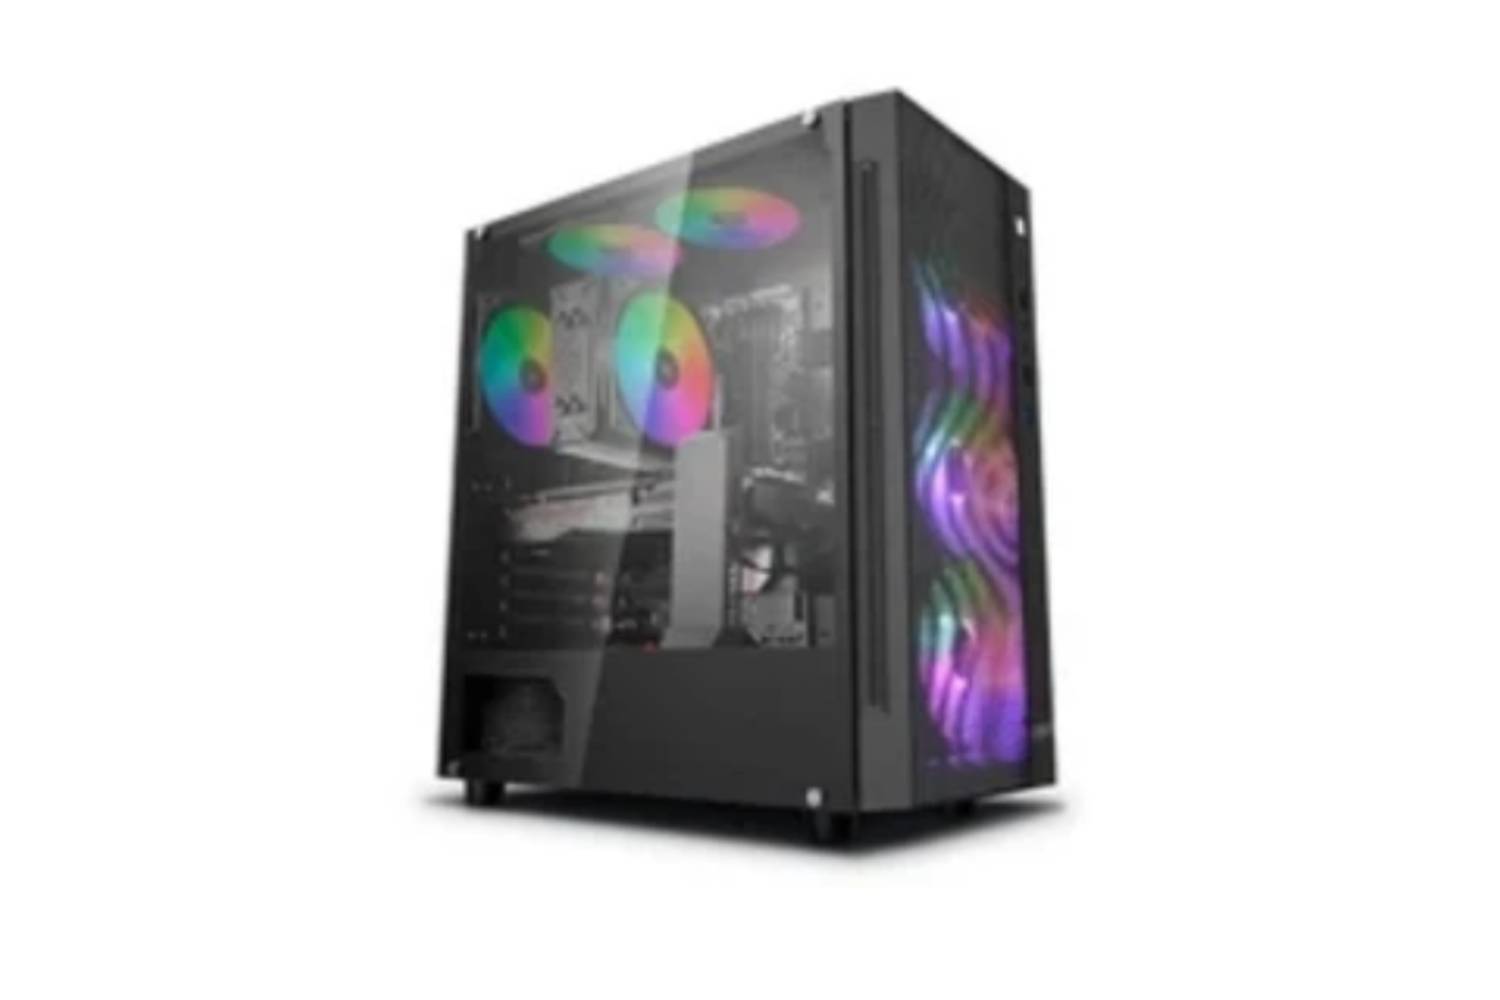 Custom Build PC with AMD MSI, ADATA, DEEPCOOL and Crucial SSD with 7200 RPM Seagate HDD